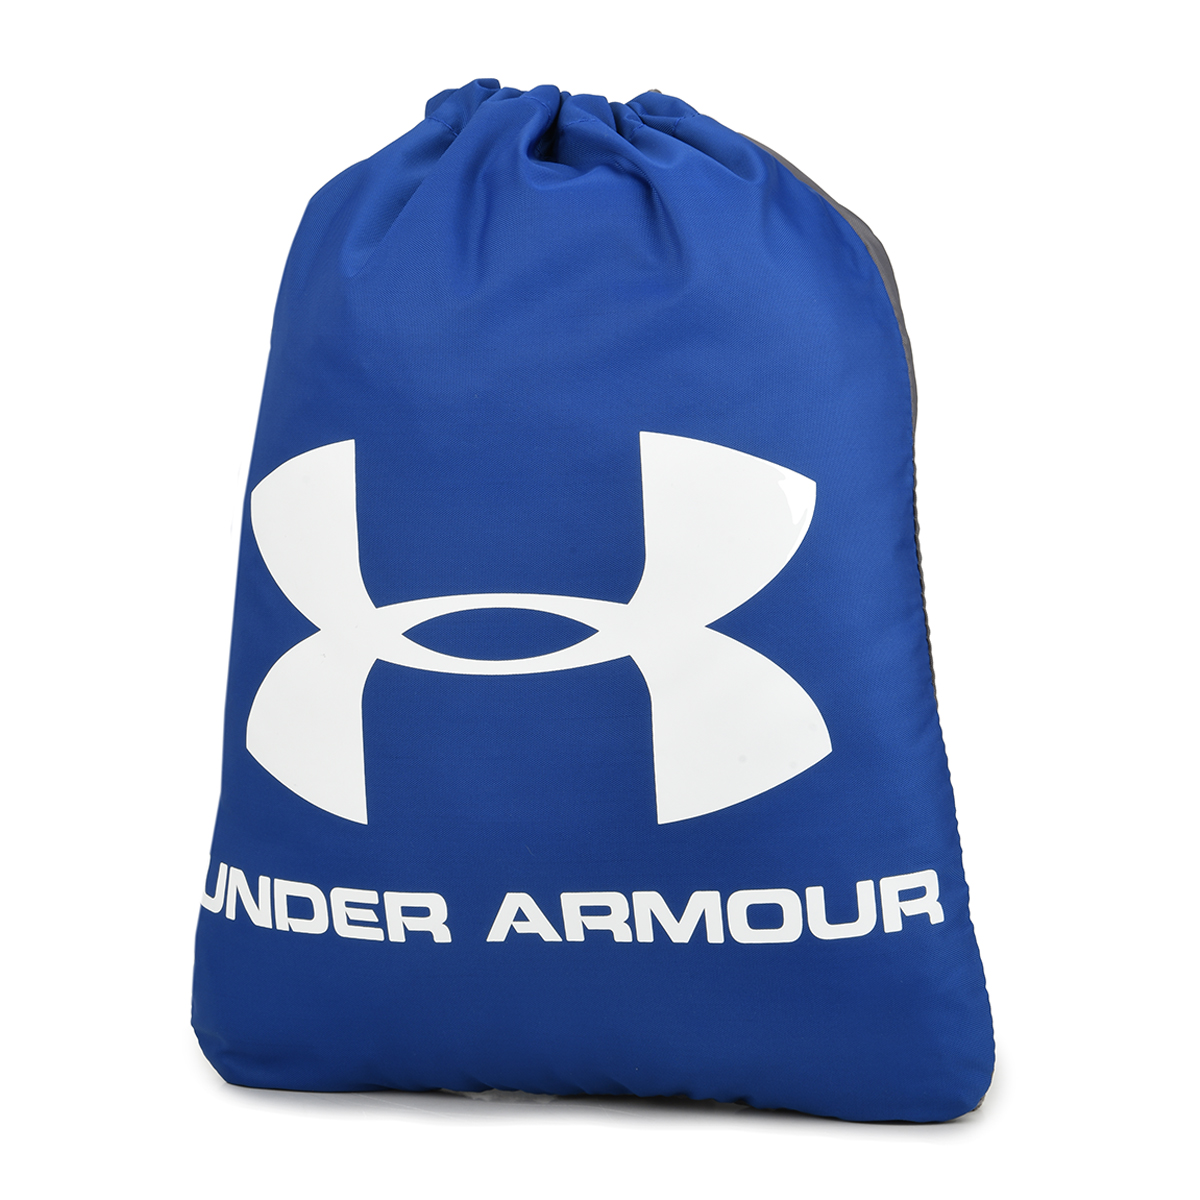 Mochila Under Armour Ozsee,  image number null